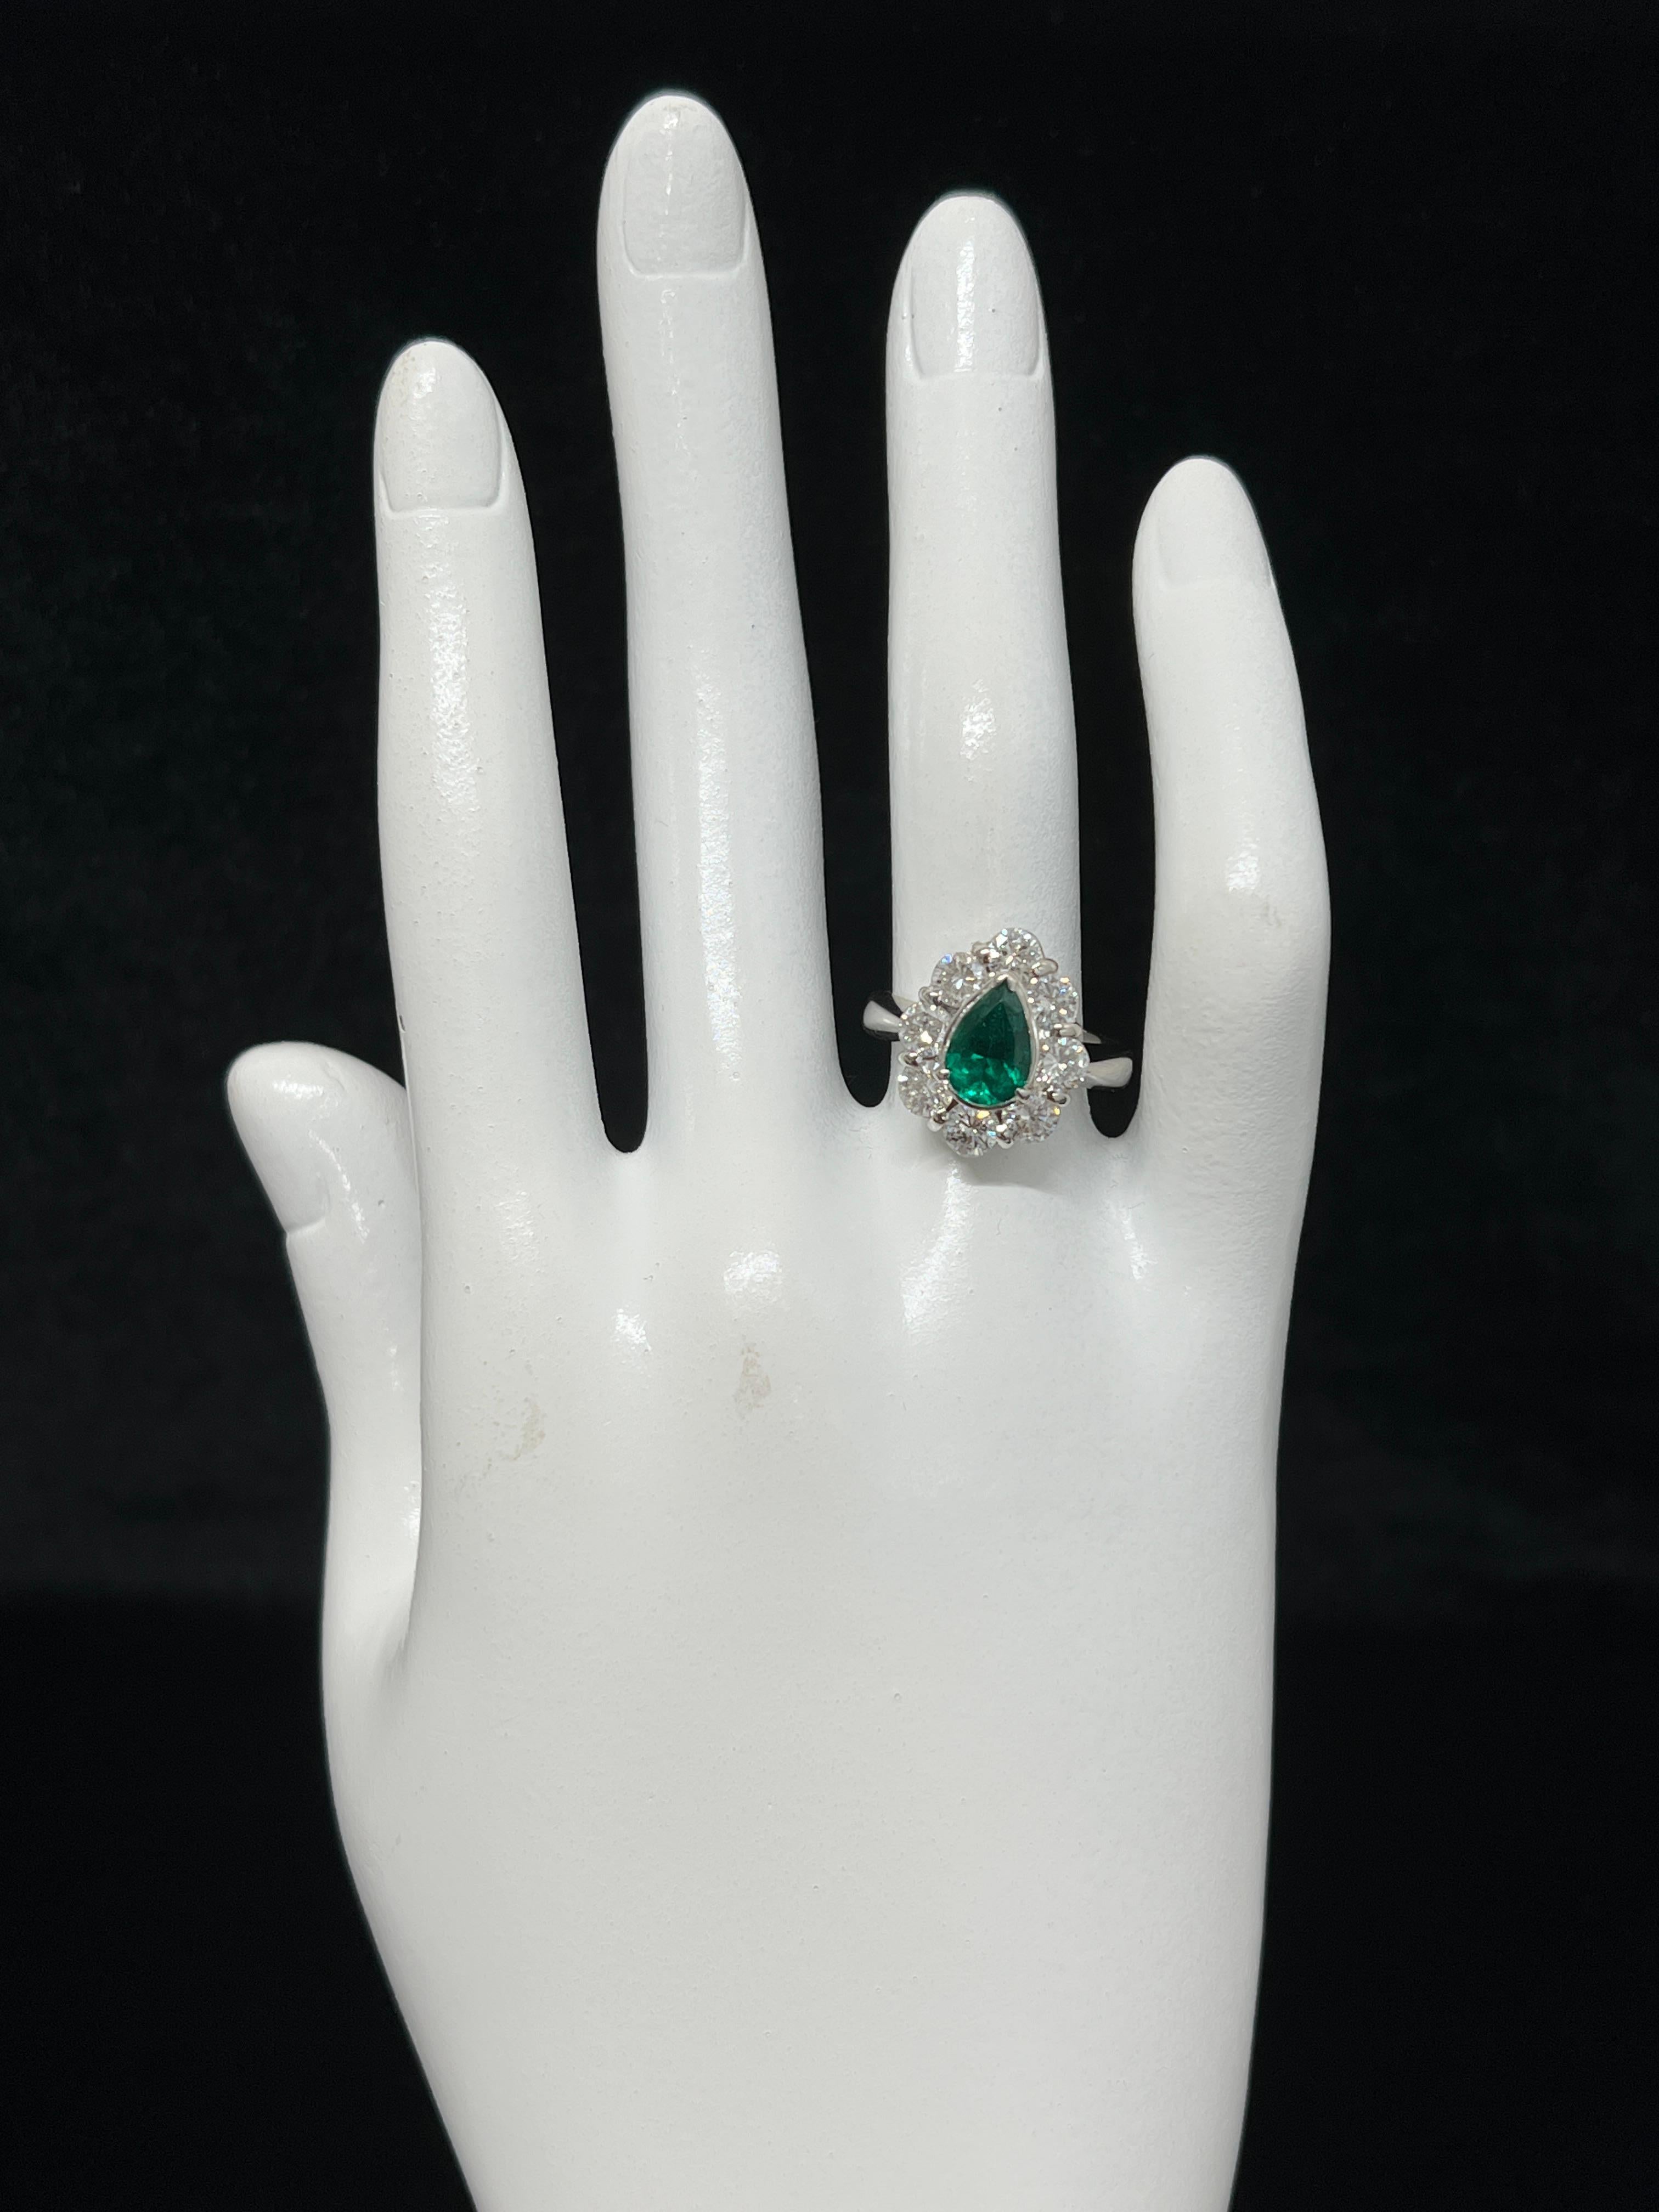 0.98 Carat Natural Pear-Shaped Emerald and Diamond Ring Set in Platinum For Sale 1